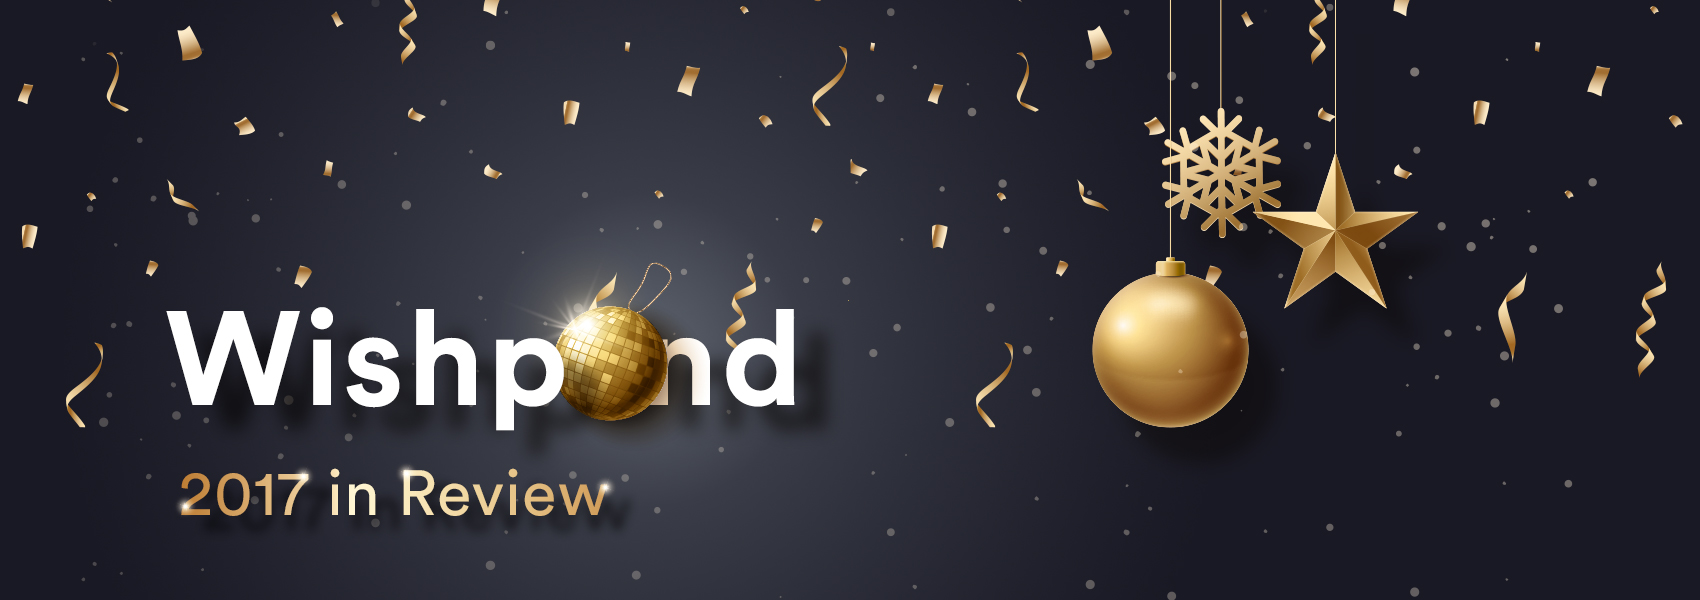 Wishpond: 2017 in Review